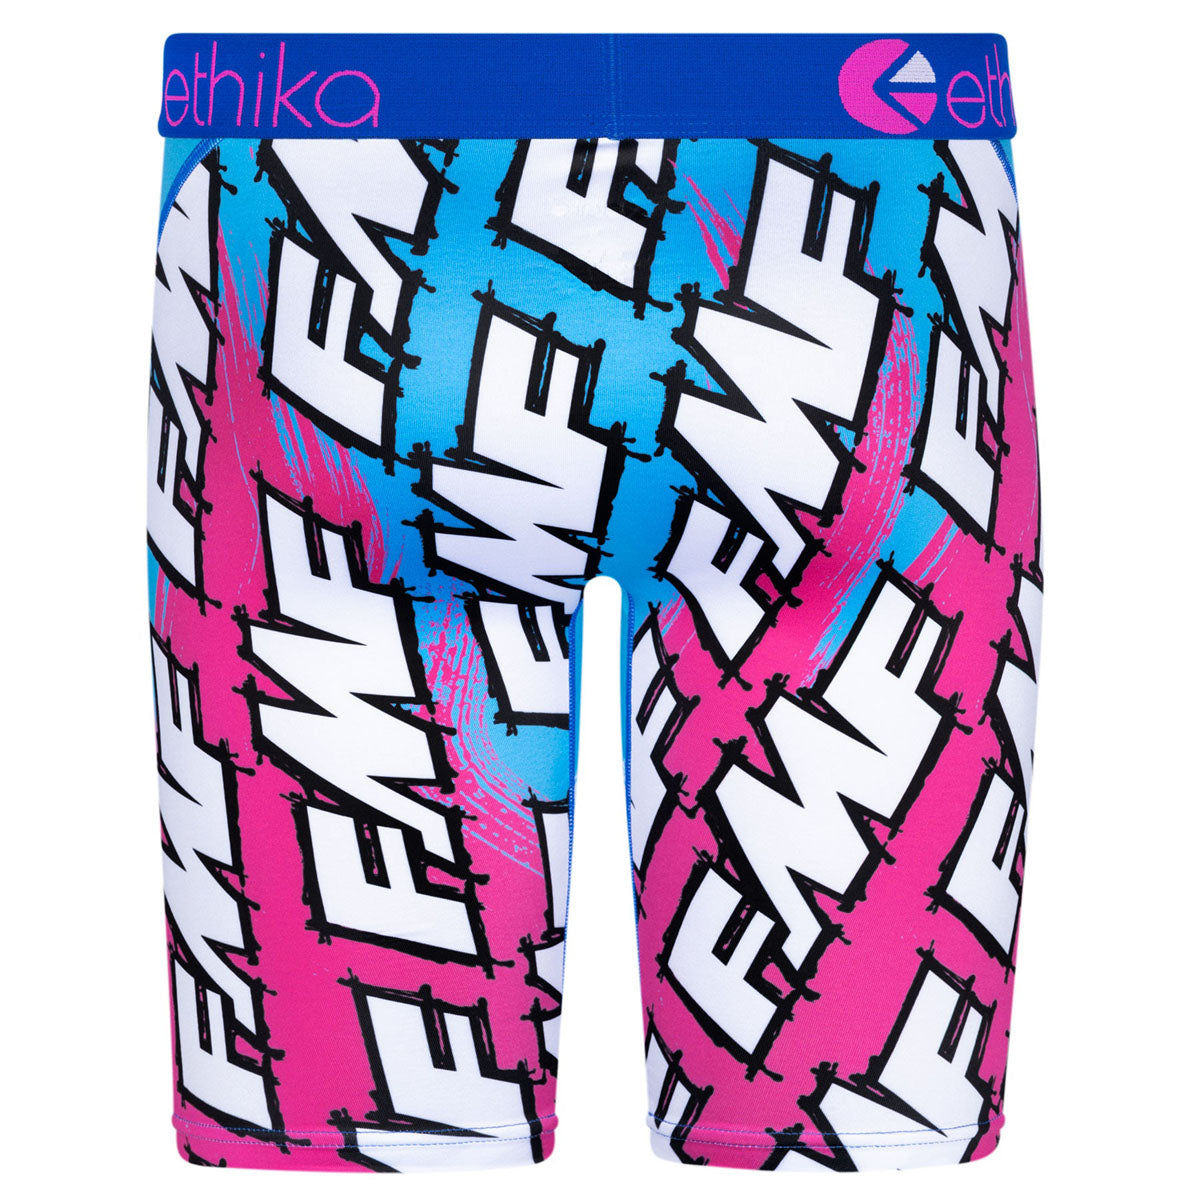 Ethika The Staple FMF Maxx'd Out Underwear - ExtremeSupply.com